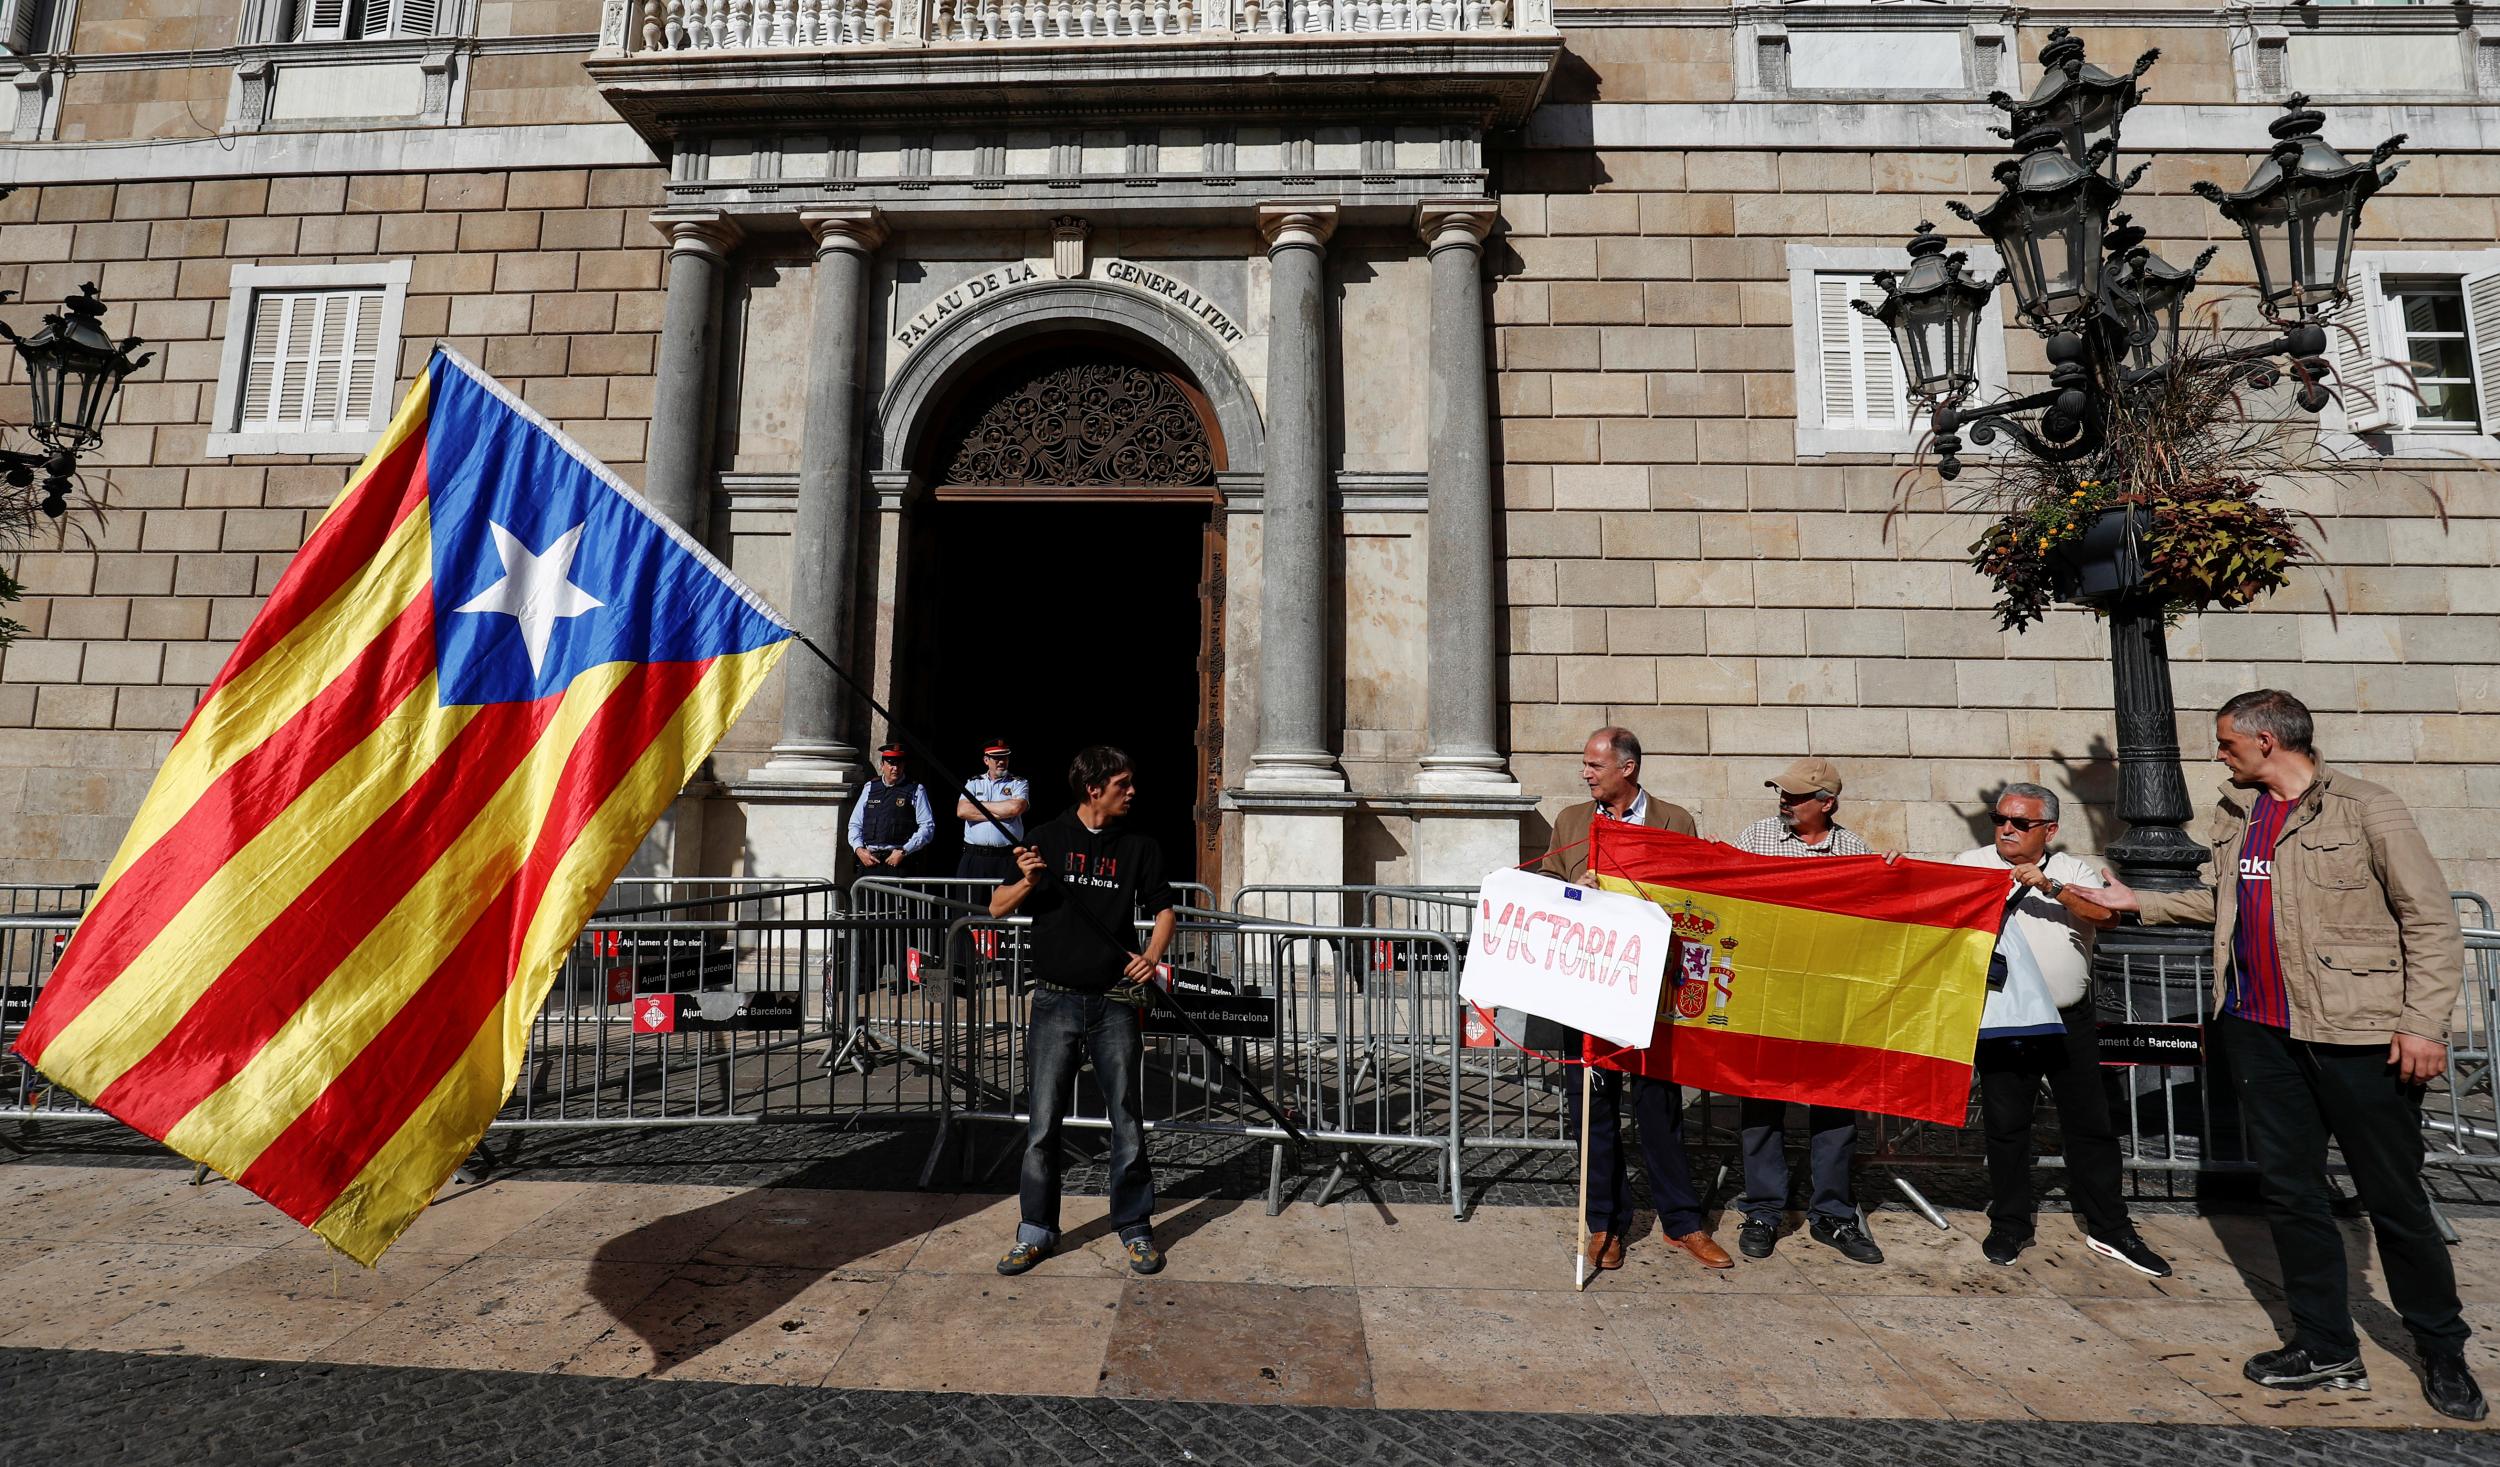 A man holding a Catalan separatist flag looks at men holding a Spanish flag outside the Catalan regional government headquarters in Barcelona